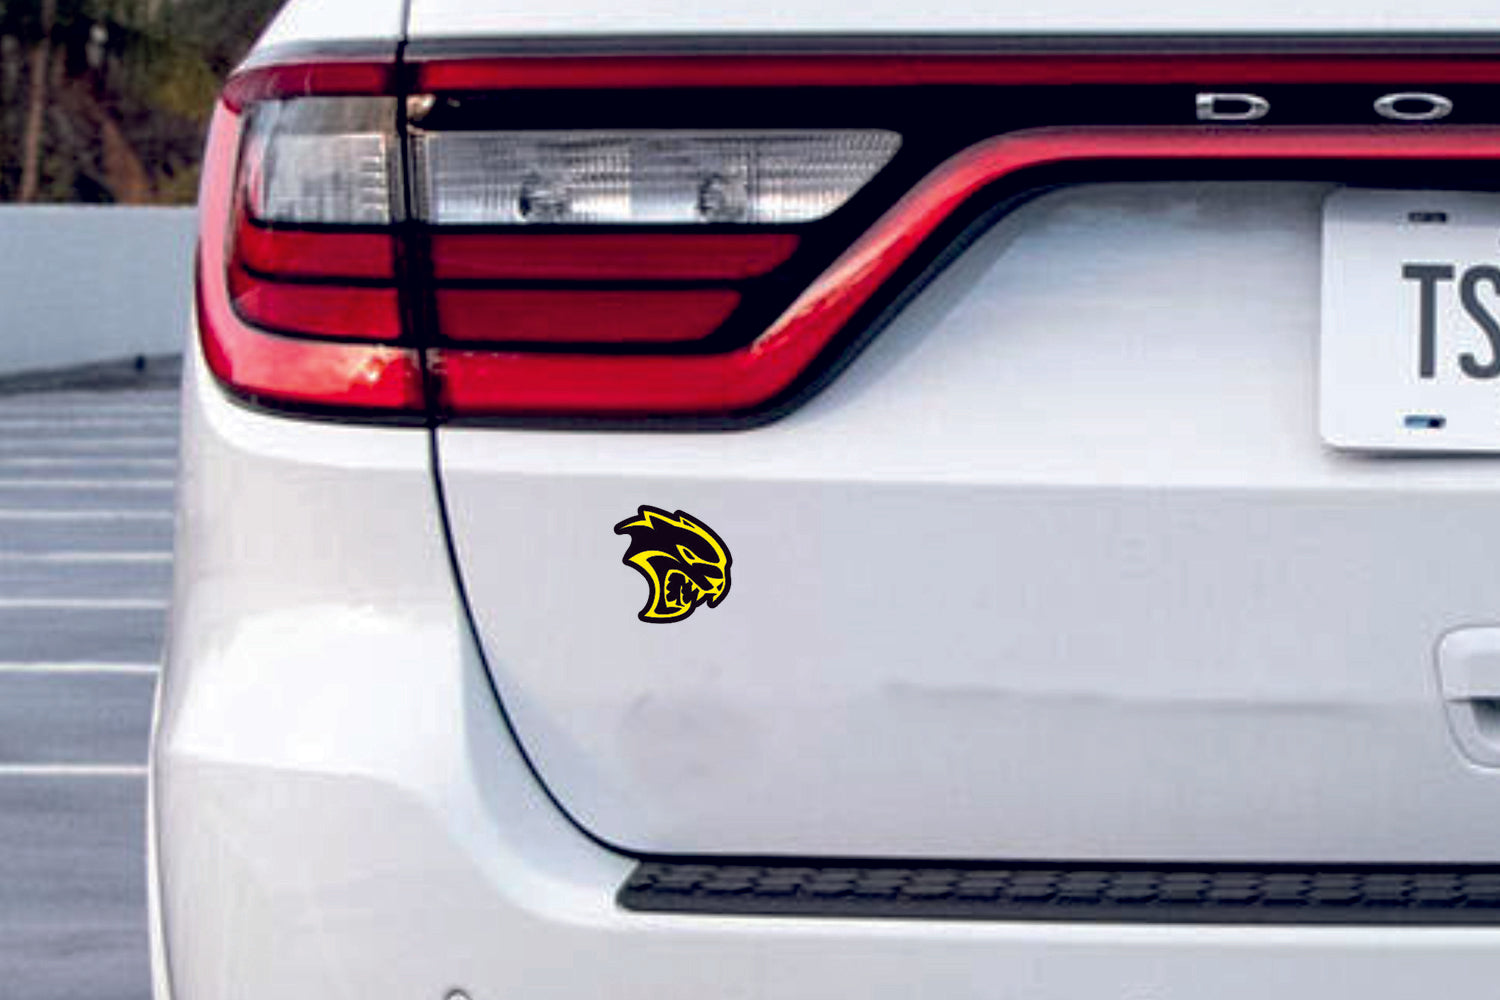 Jeep tailgate trunk rear emblem with Hellcat logo